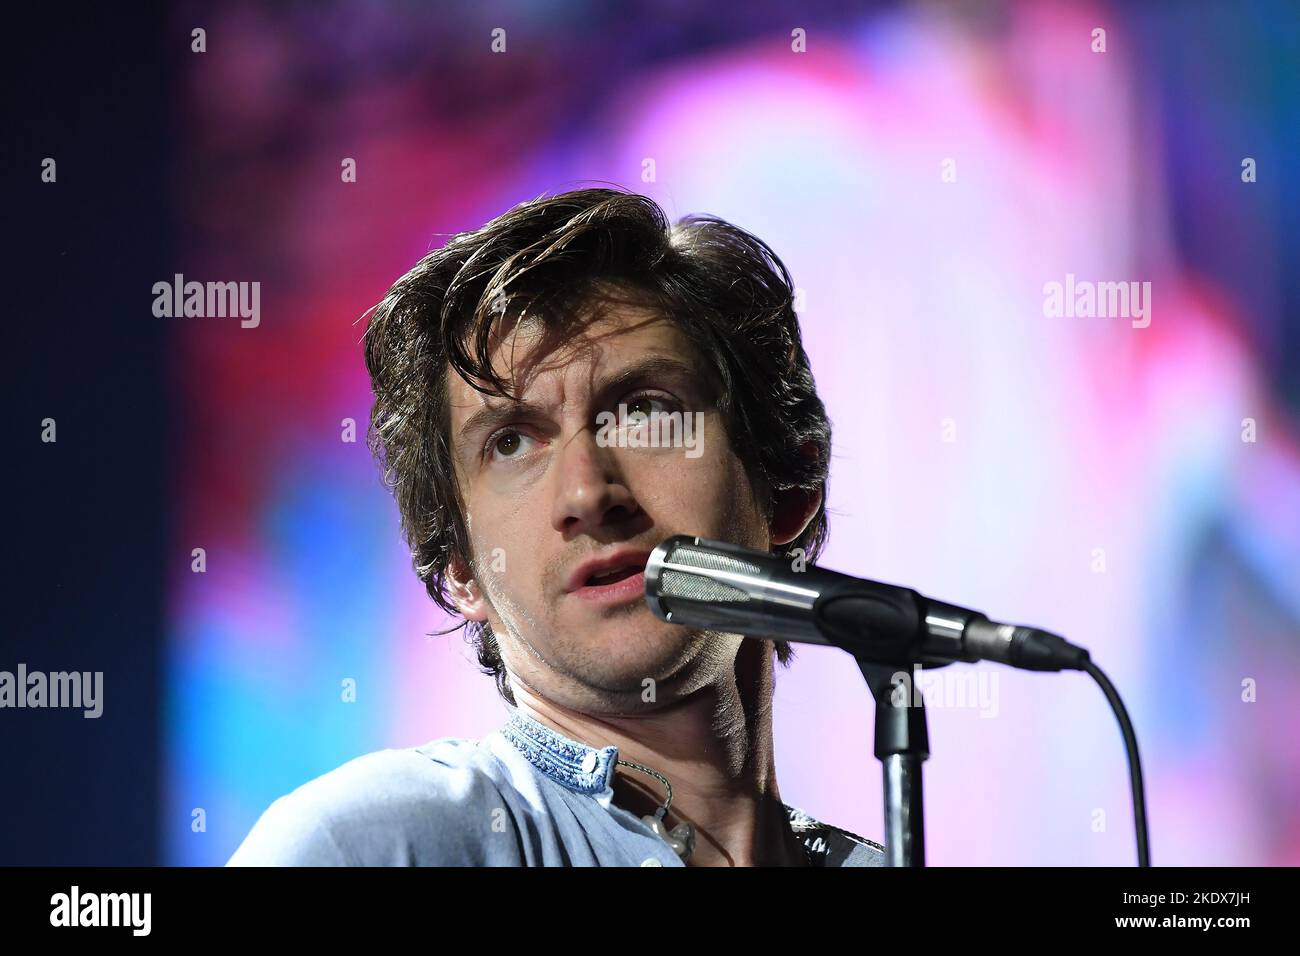 Rio de Janeiro,Brazil,November 4, 2022.Musician and vocalist Alex Turner of the indie rock band Artic Monkeys, during a concert at the Jeunesse Arena Stock Photo